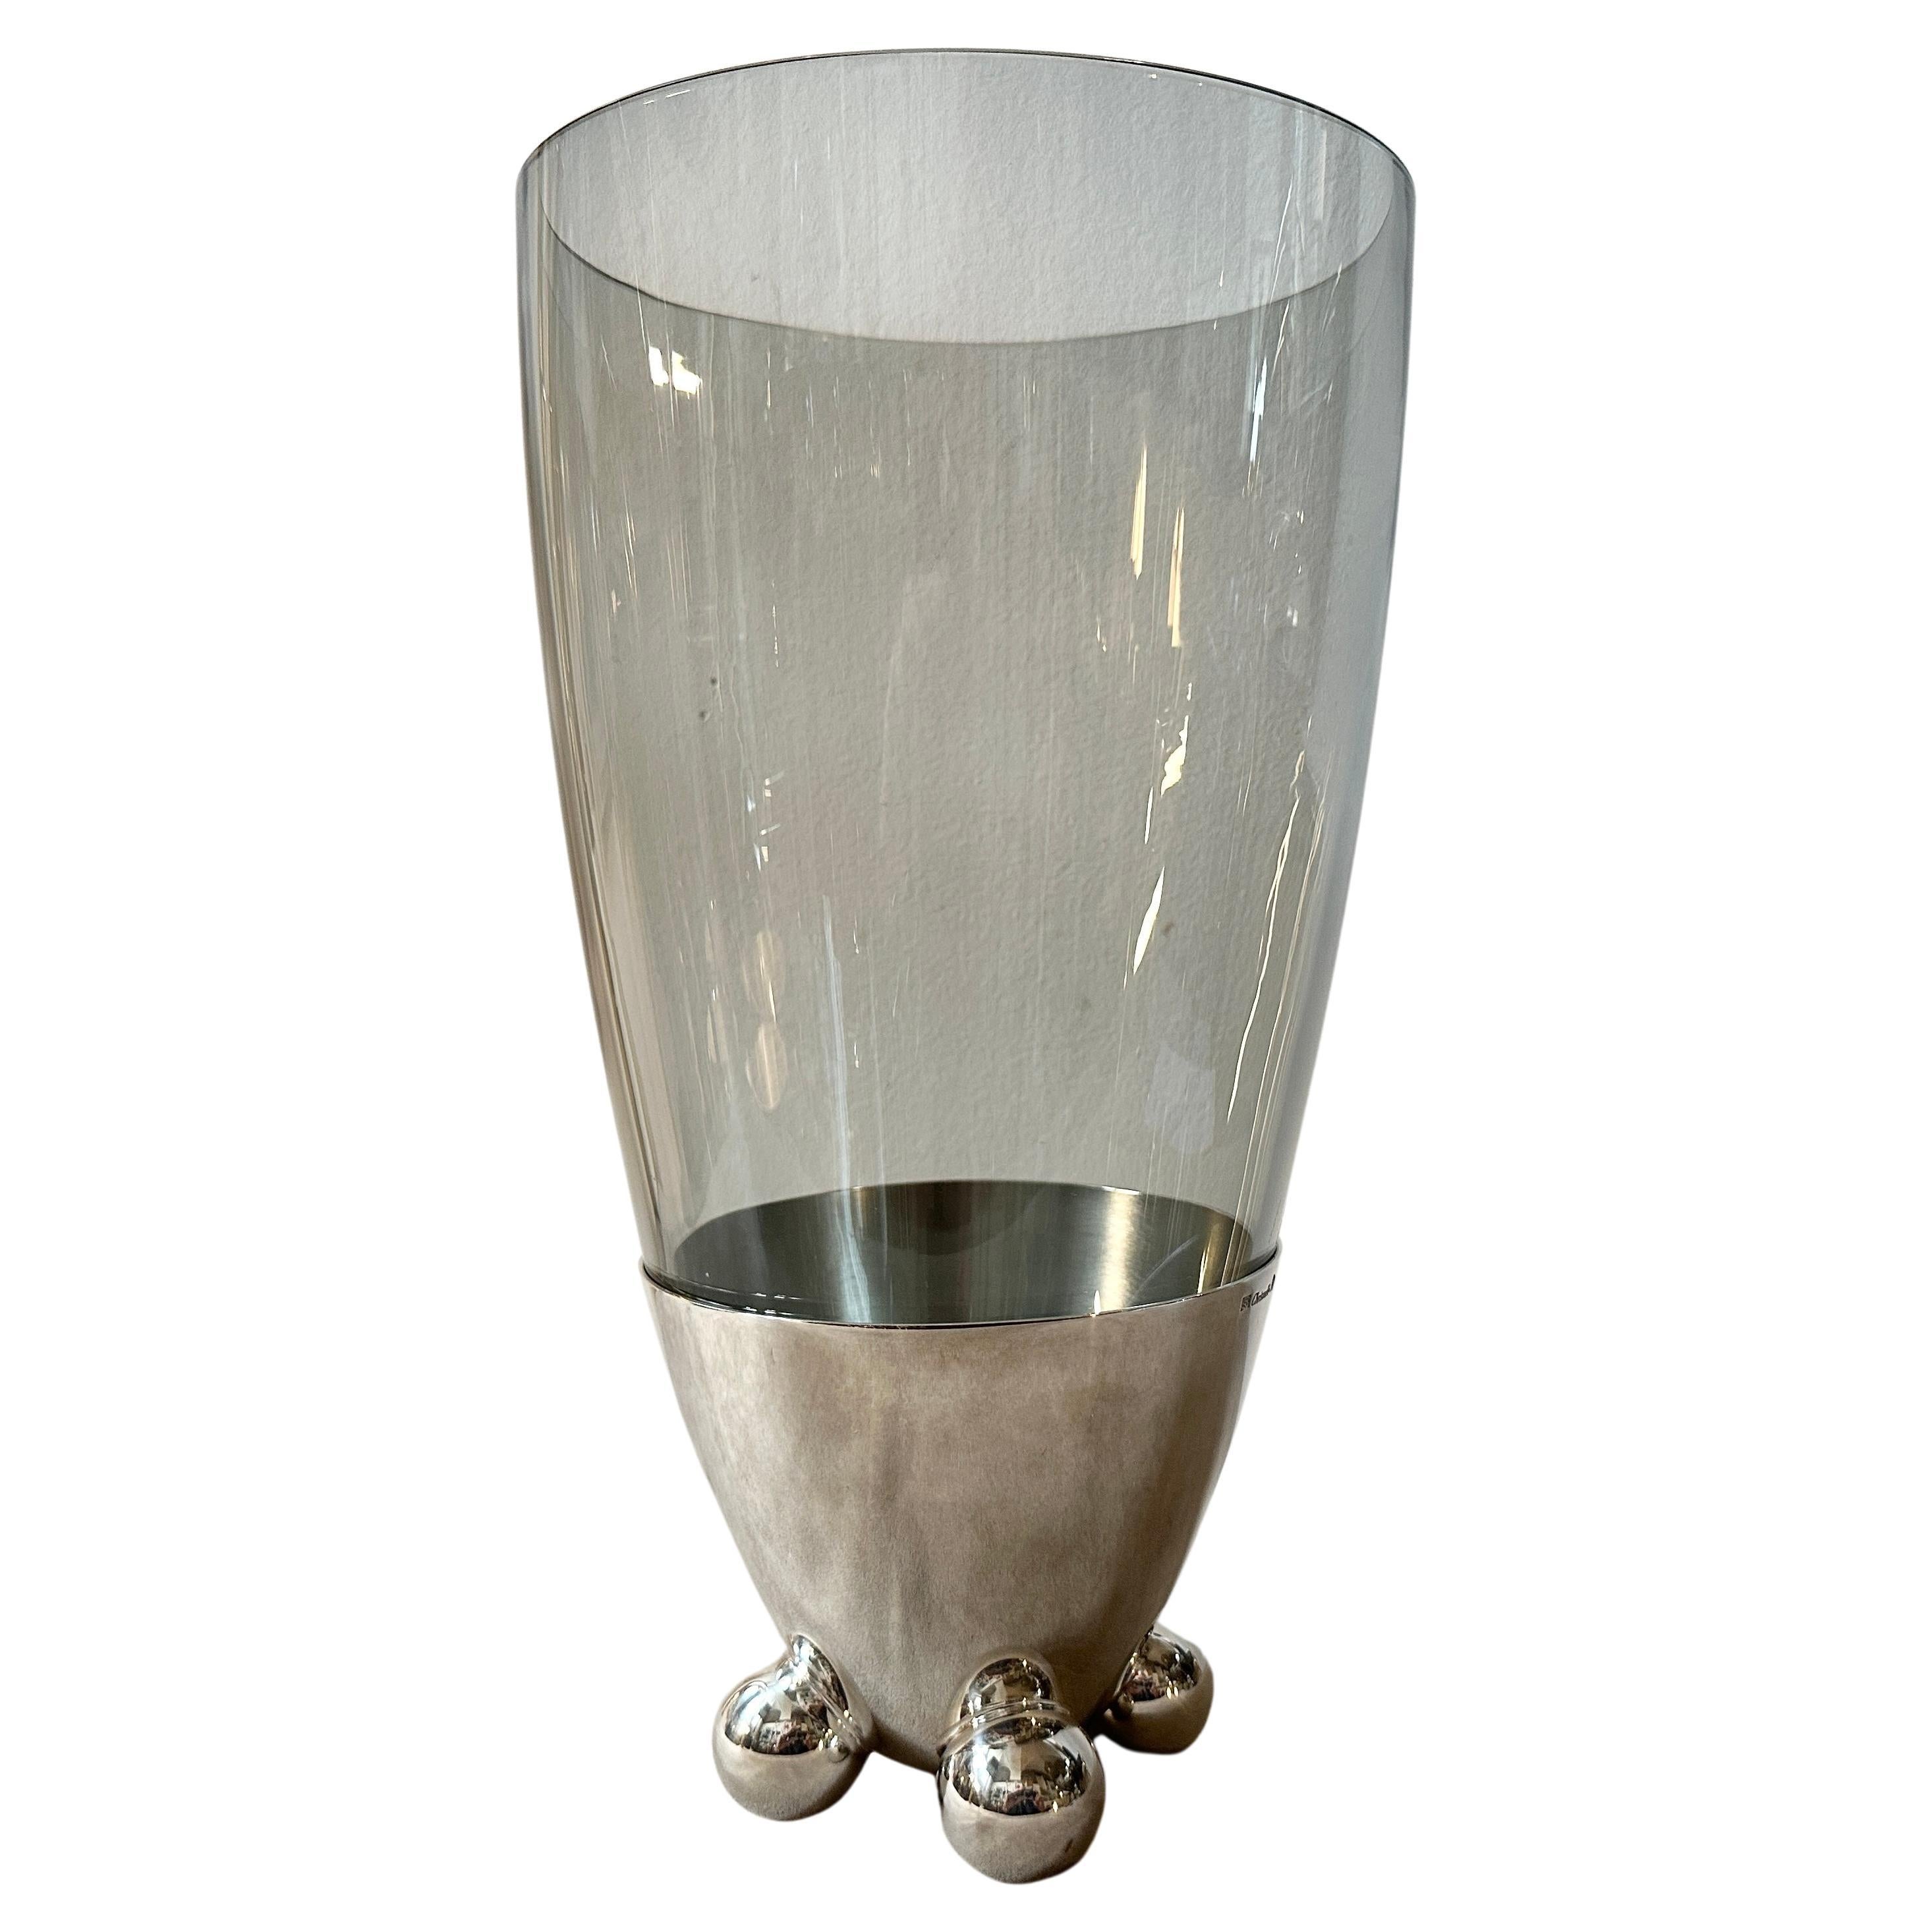 1990s Space Age Silver Plated Atomes Vase by Richard Hutten for Christofle